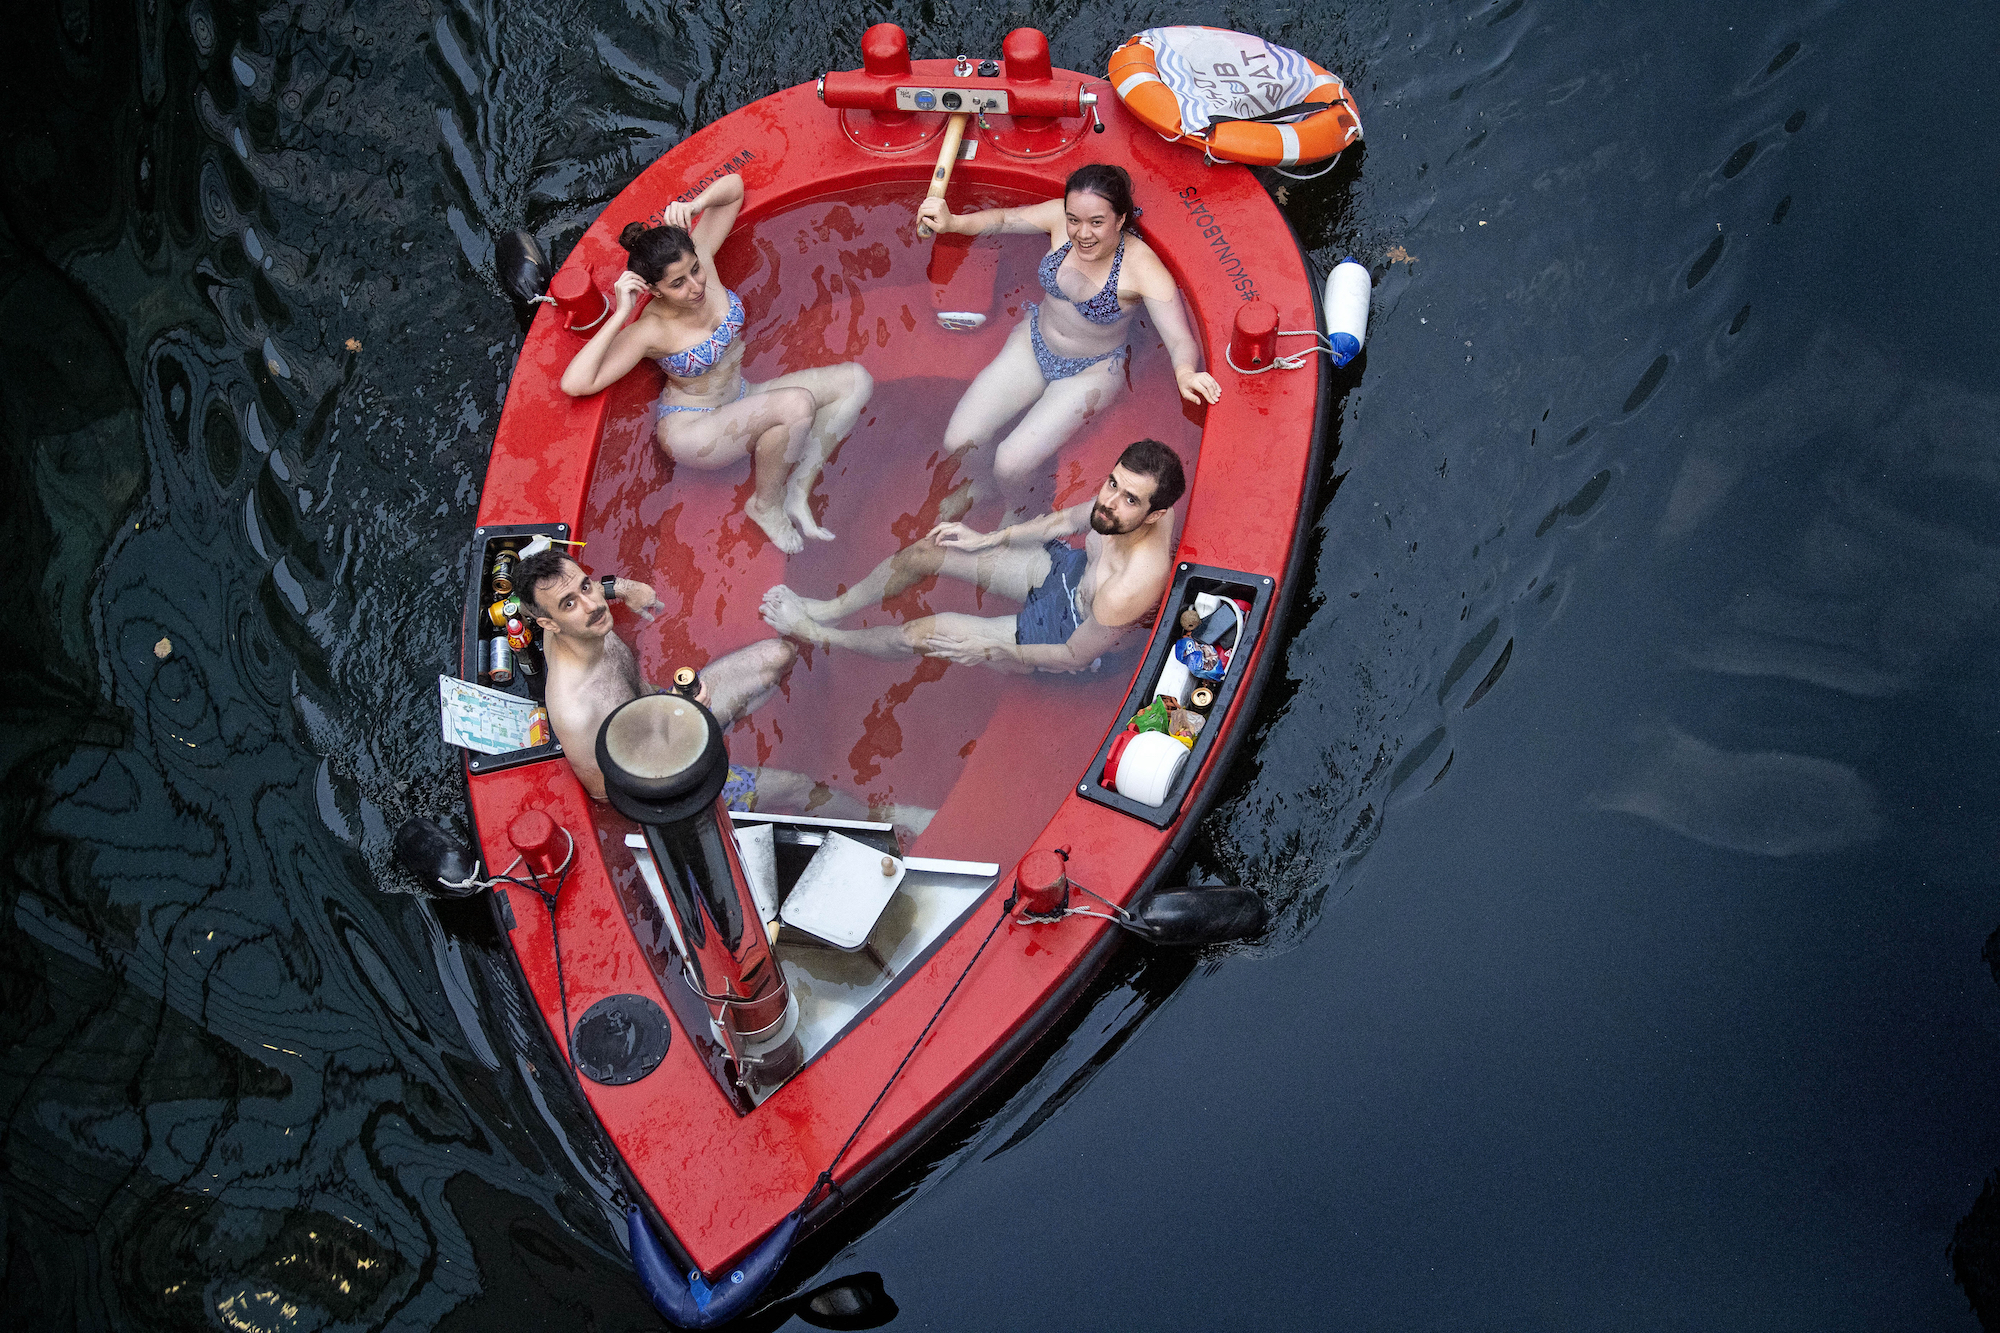 Four people sit inside a red hot tub boat